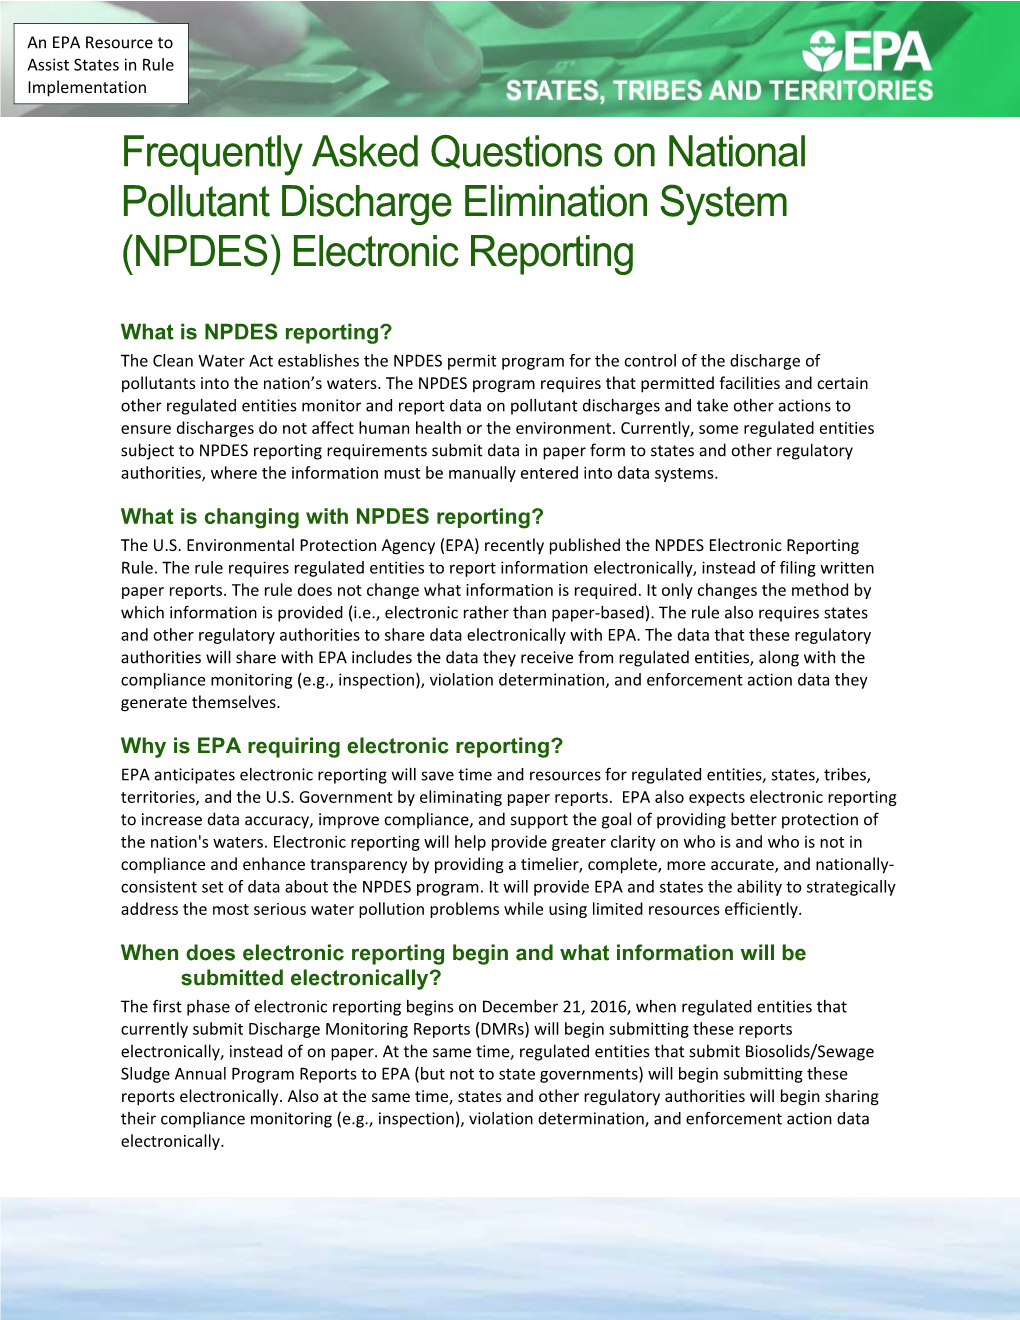 Frequently Asked Questions on National Pollutant Discharge Elimination System (NPDES) Electronic